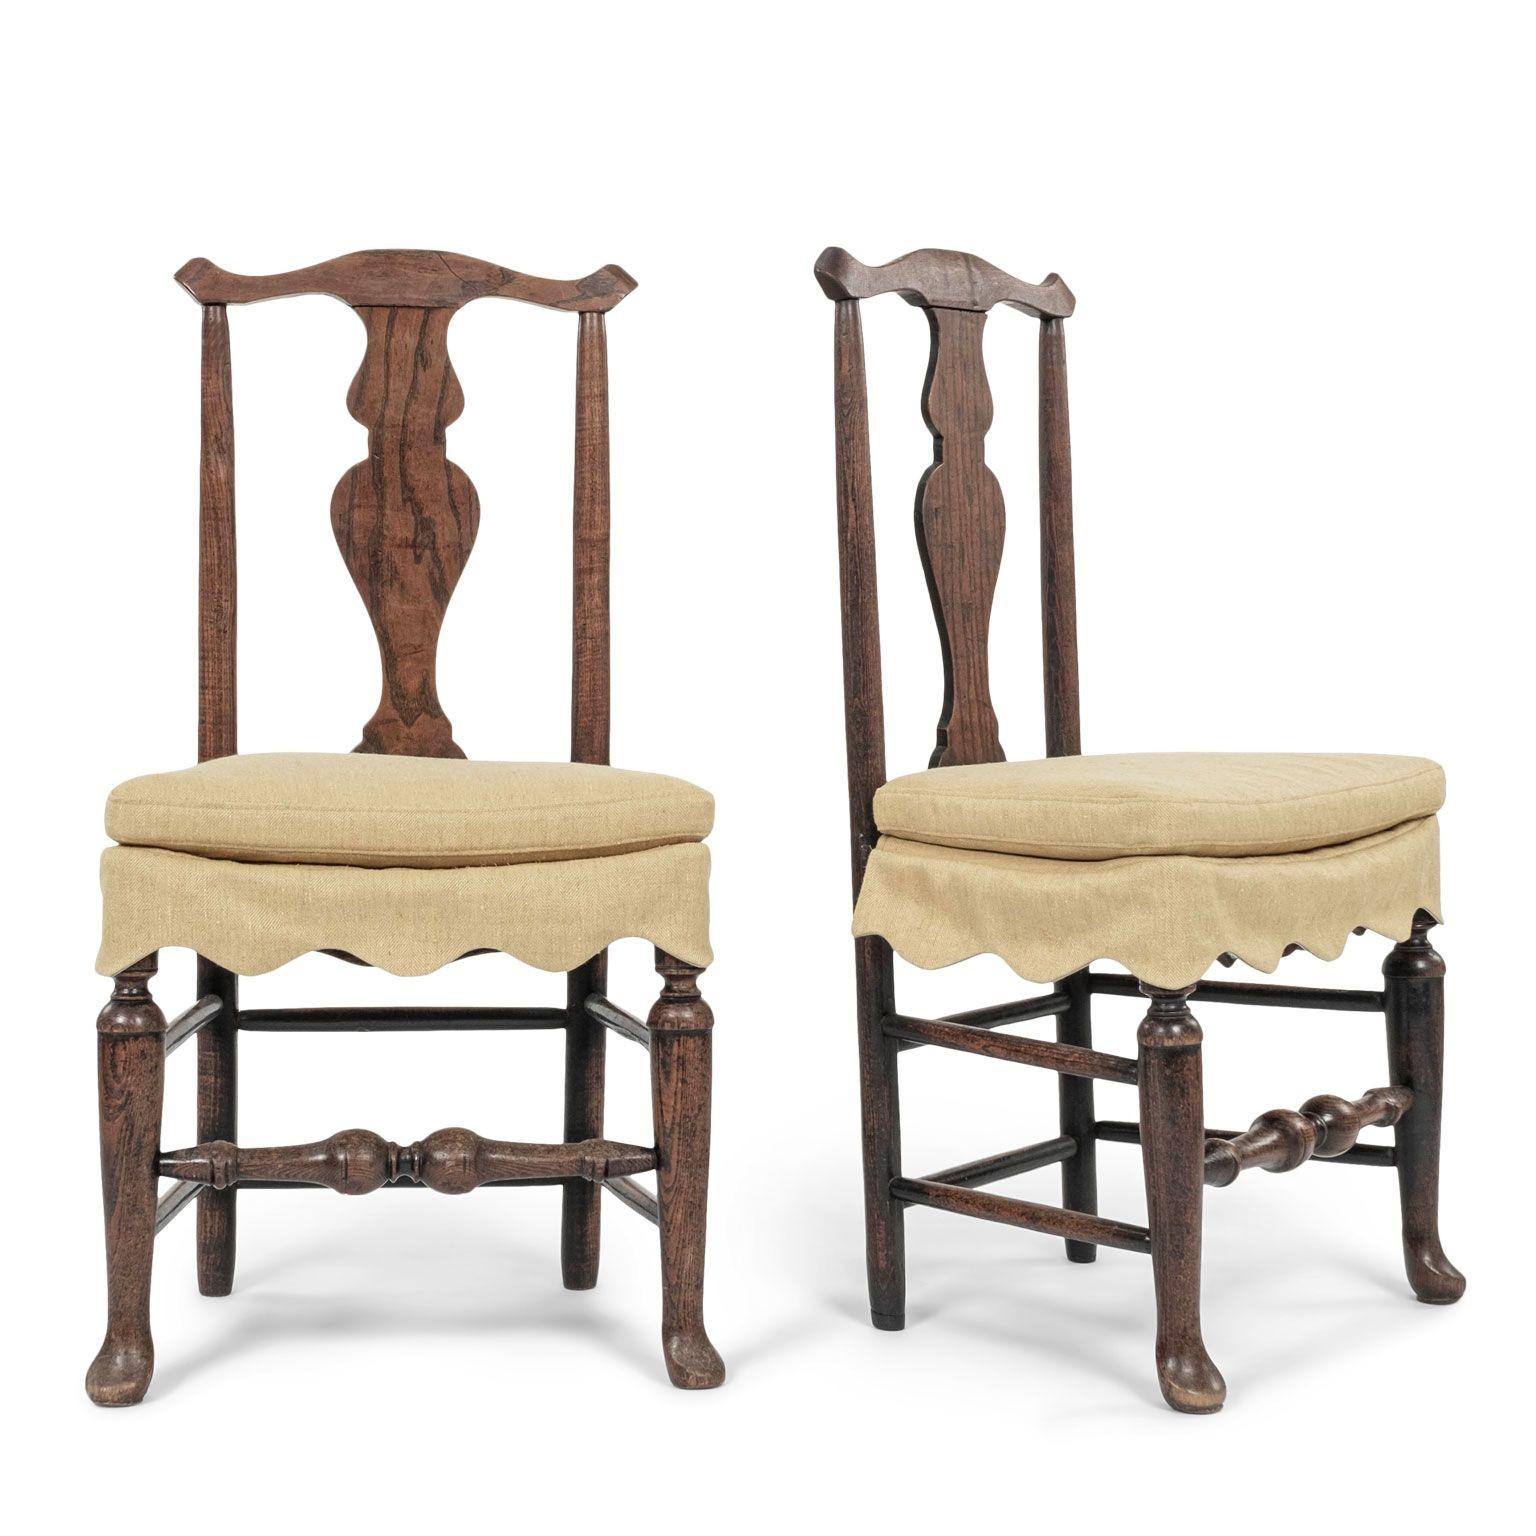 Pair of elm side chairs dressed in mustard-color linen skirts. English country side chairs hand-carved from elm wood in Queen Anne style circa 1750-1779. Beautiful wood grain and brown color. Sturdy, stable with no wobble. Newly dressed in